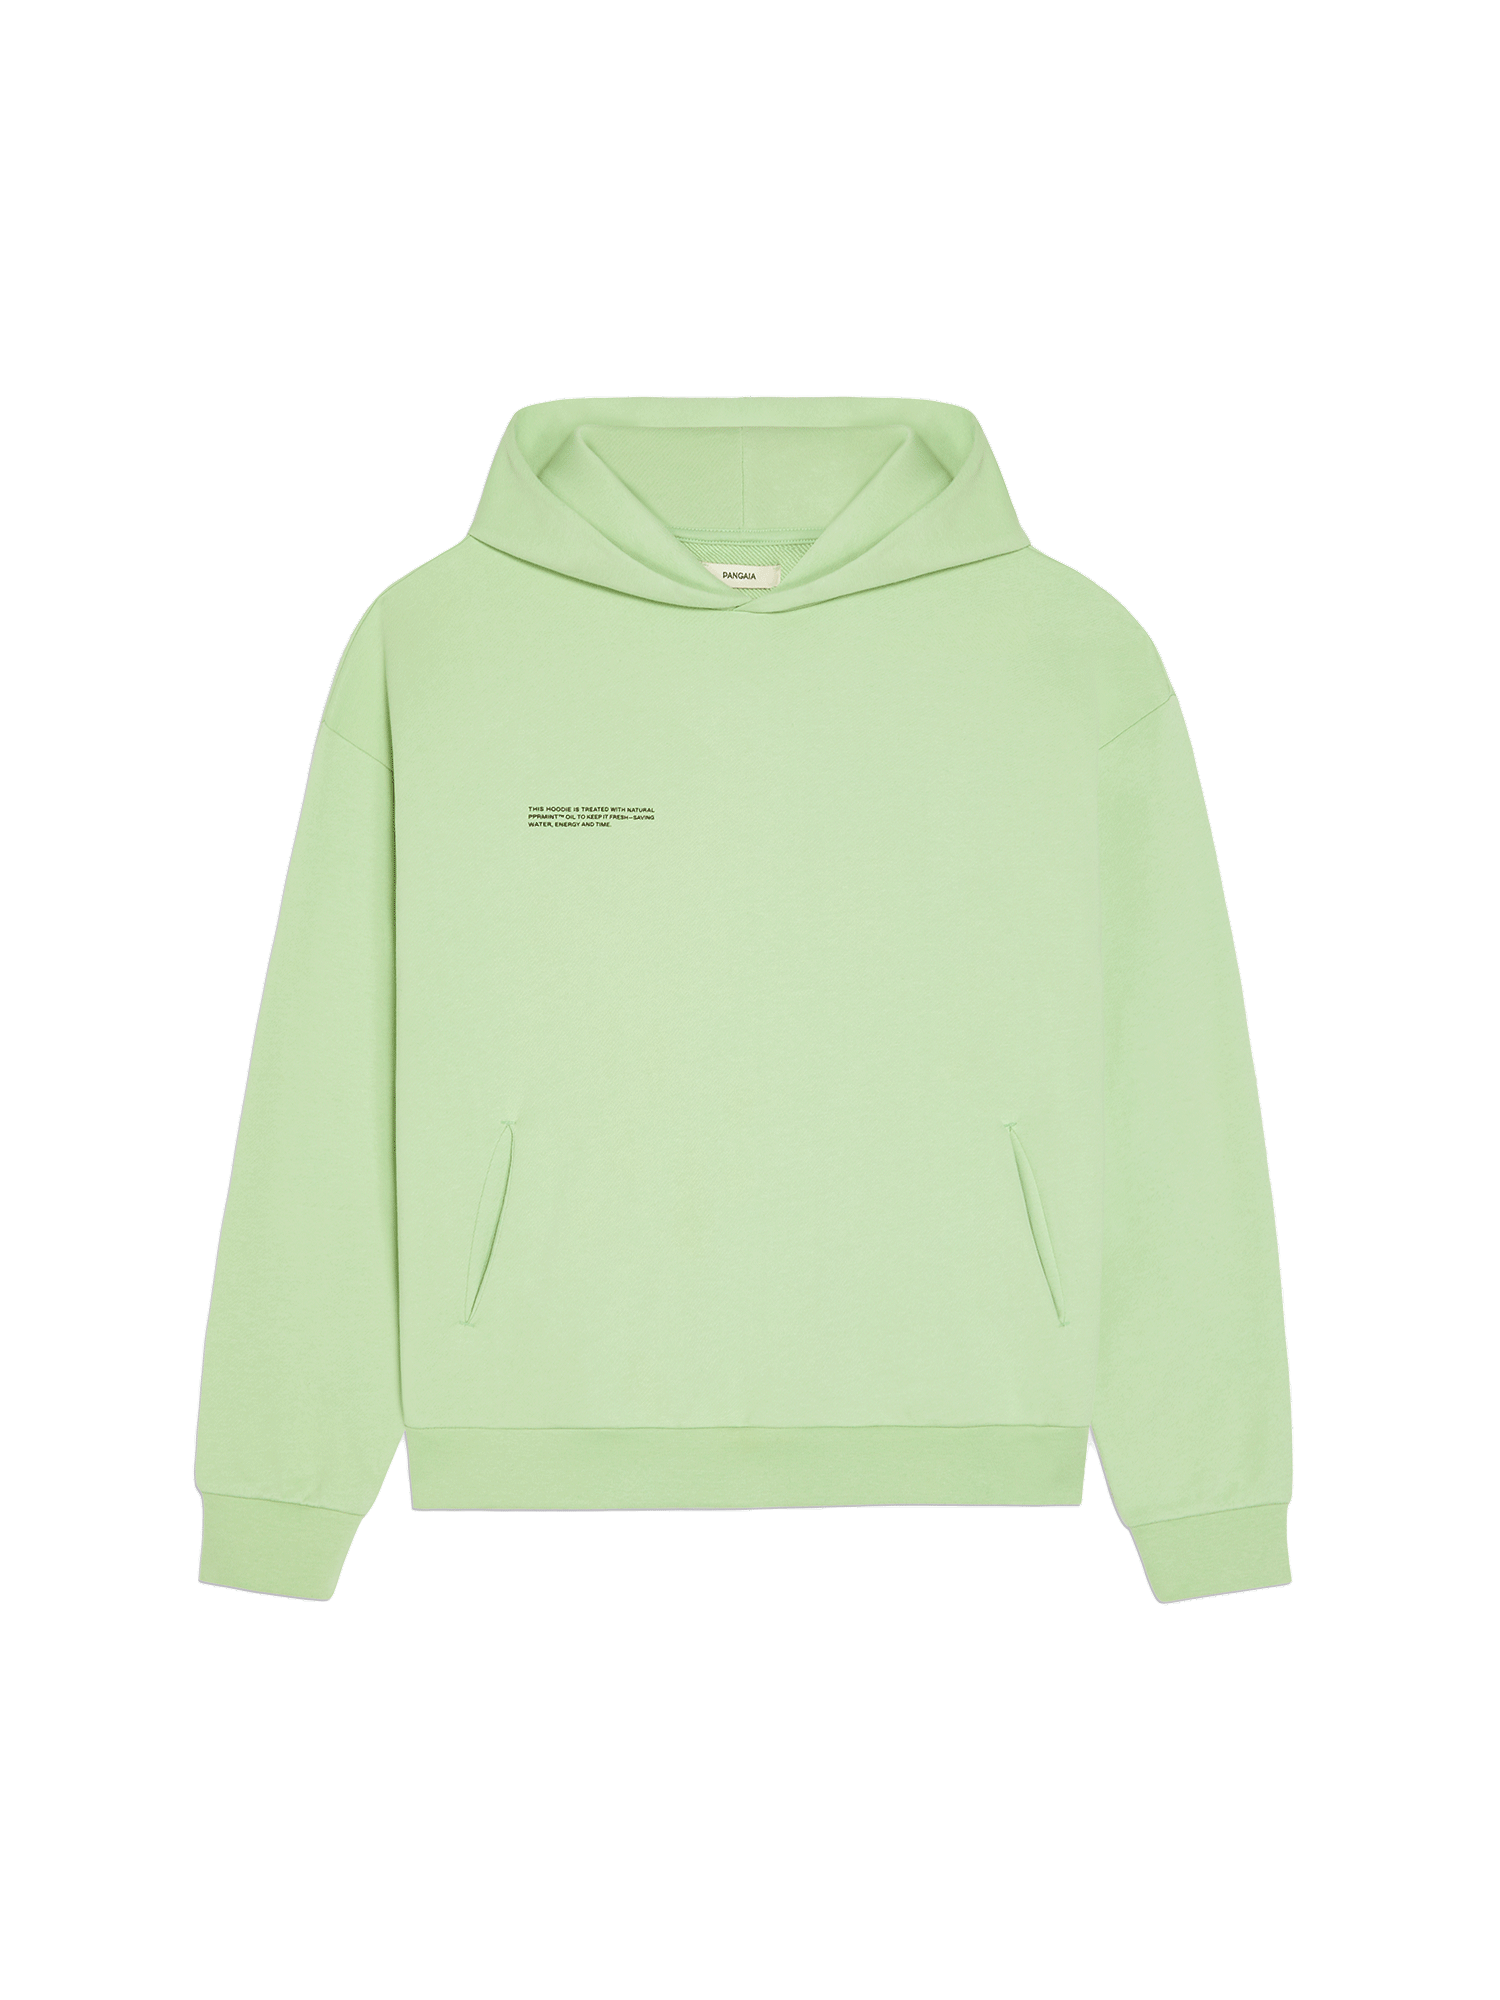 https://storage.googleapis.com/download/storage/v1/b/whering.appspot.com/o/marketplace_product_images%2Fpangaia-archive-365-midweight-hoodiepistachio-green-krcykADkEeYBPLqcDpGncT.png?generation=1693371653846361&alt=media